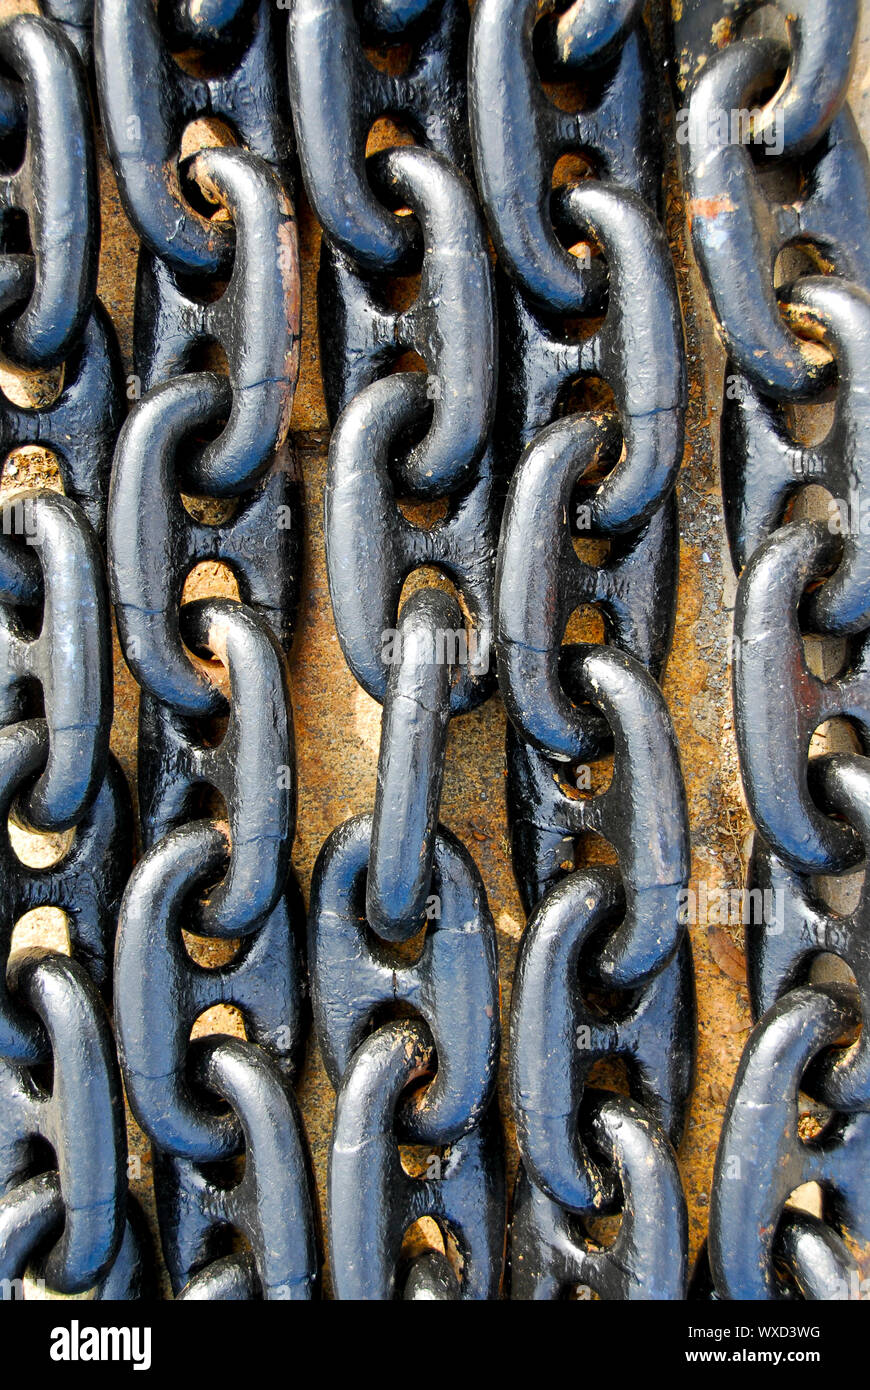 Chain Links, Close-up of large shiny welded metal chain lin…